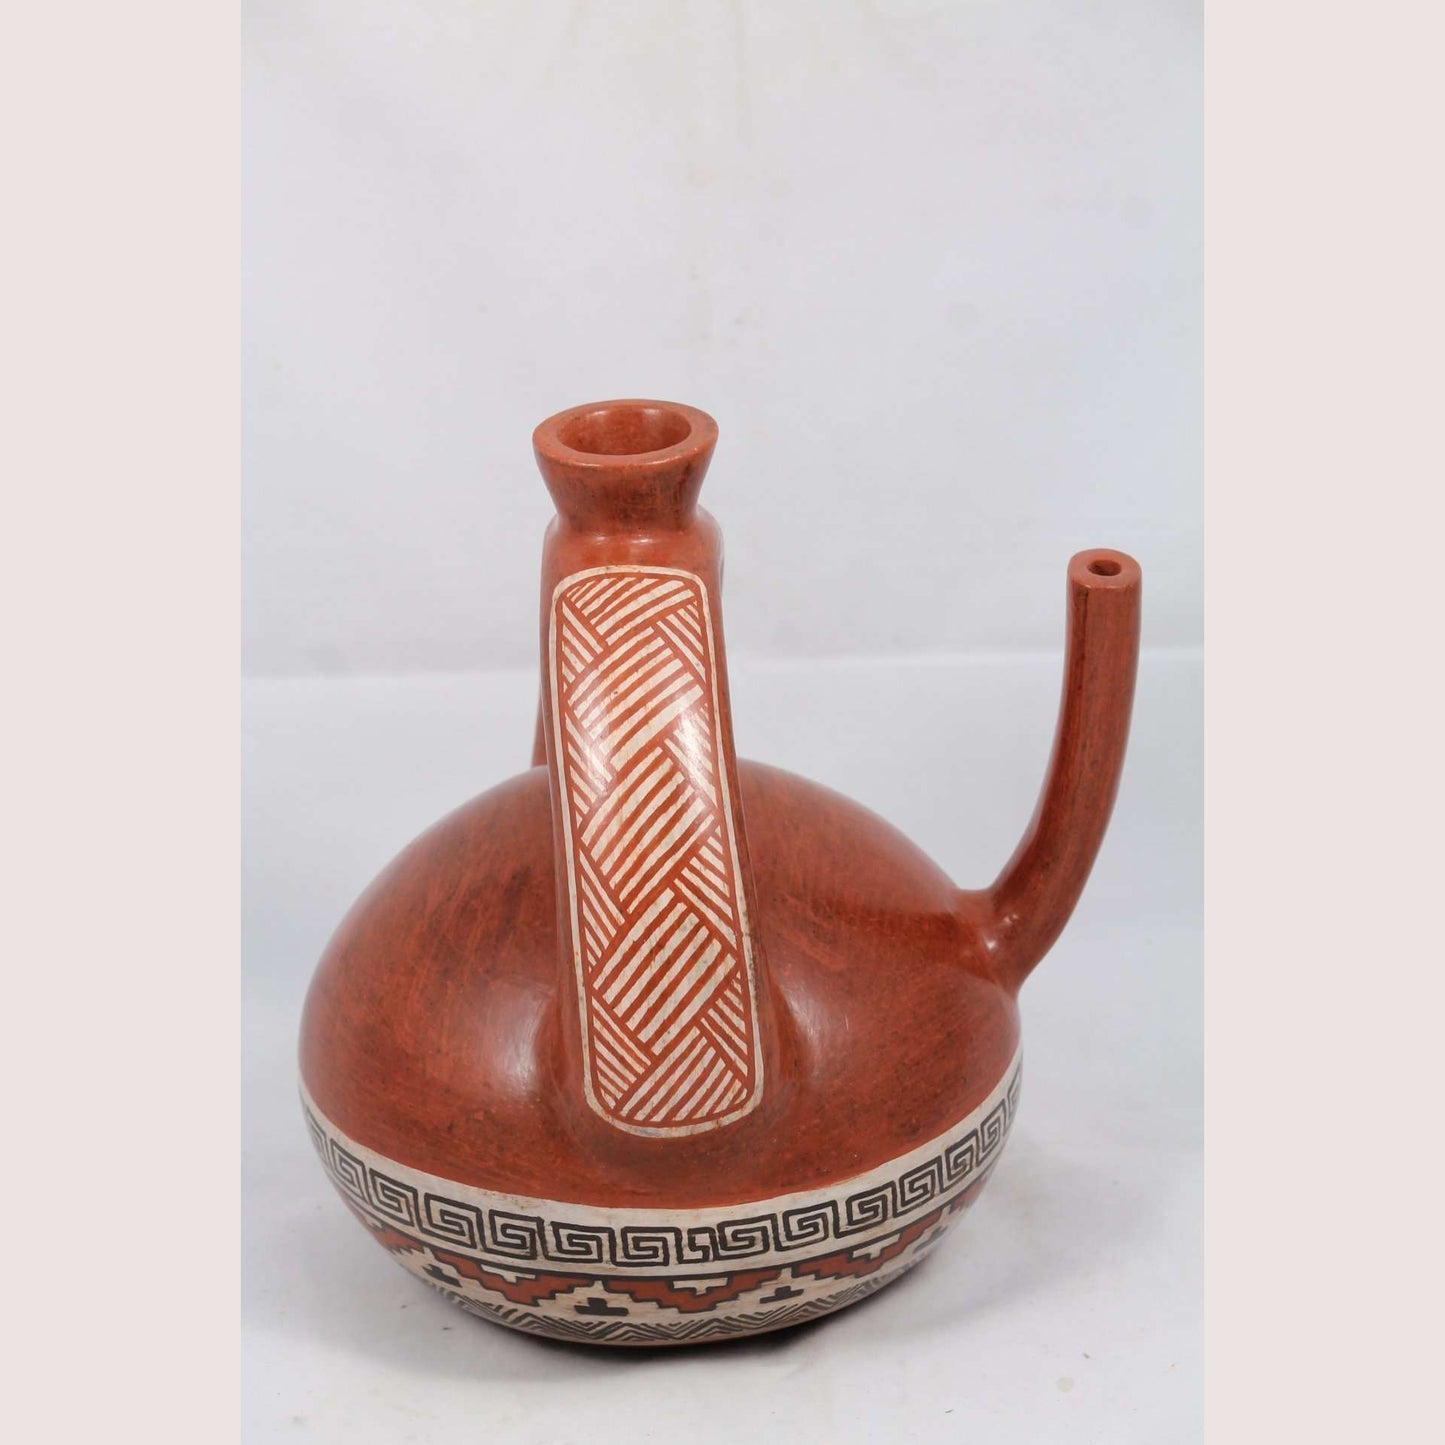 Ceramic Pitcher Hand Made Pottery Mexican Folk Art Potter Signed Huipe Spout